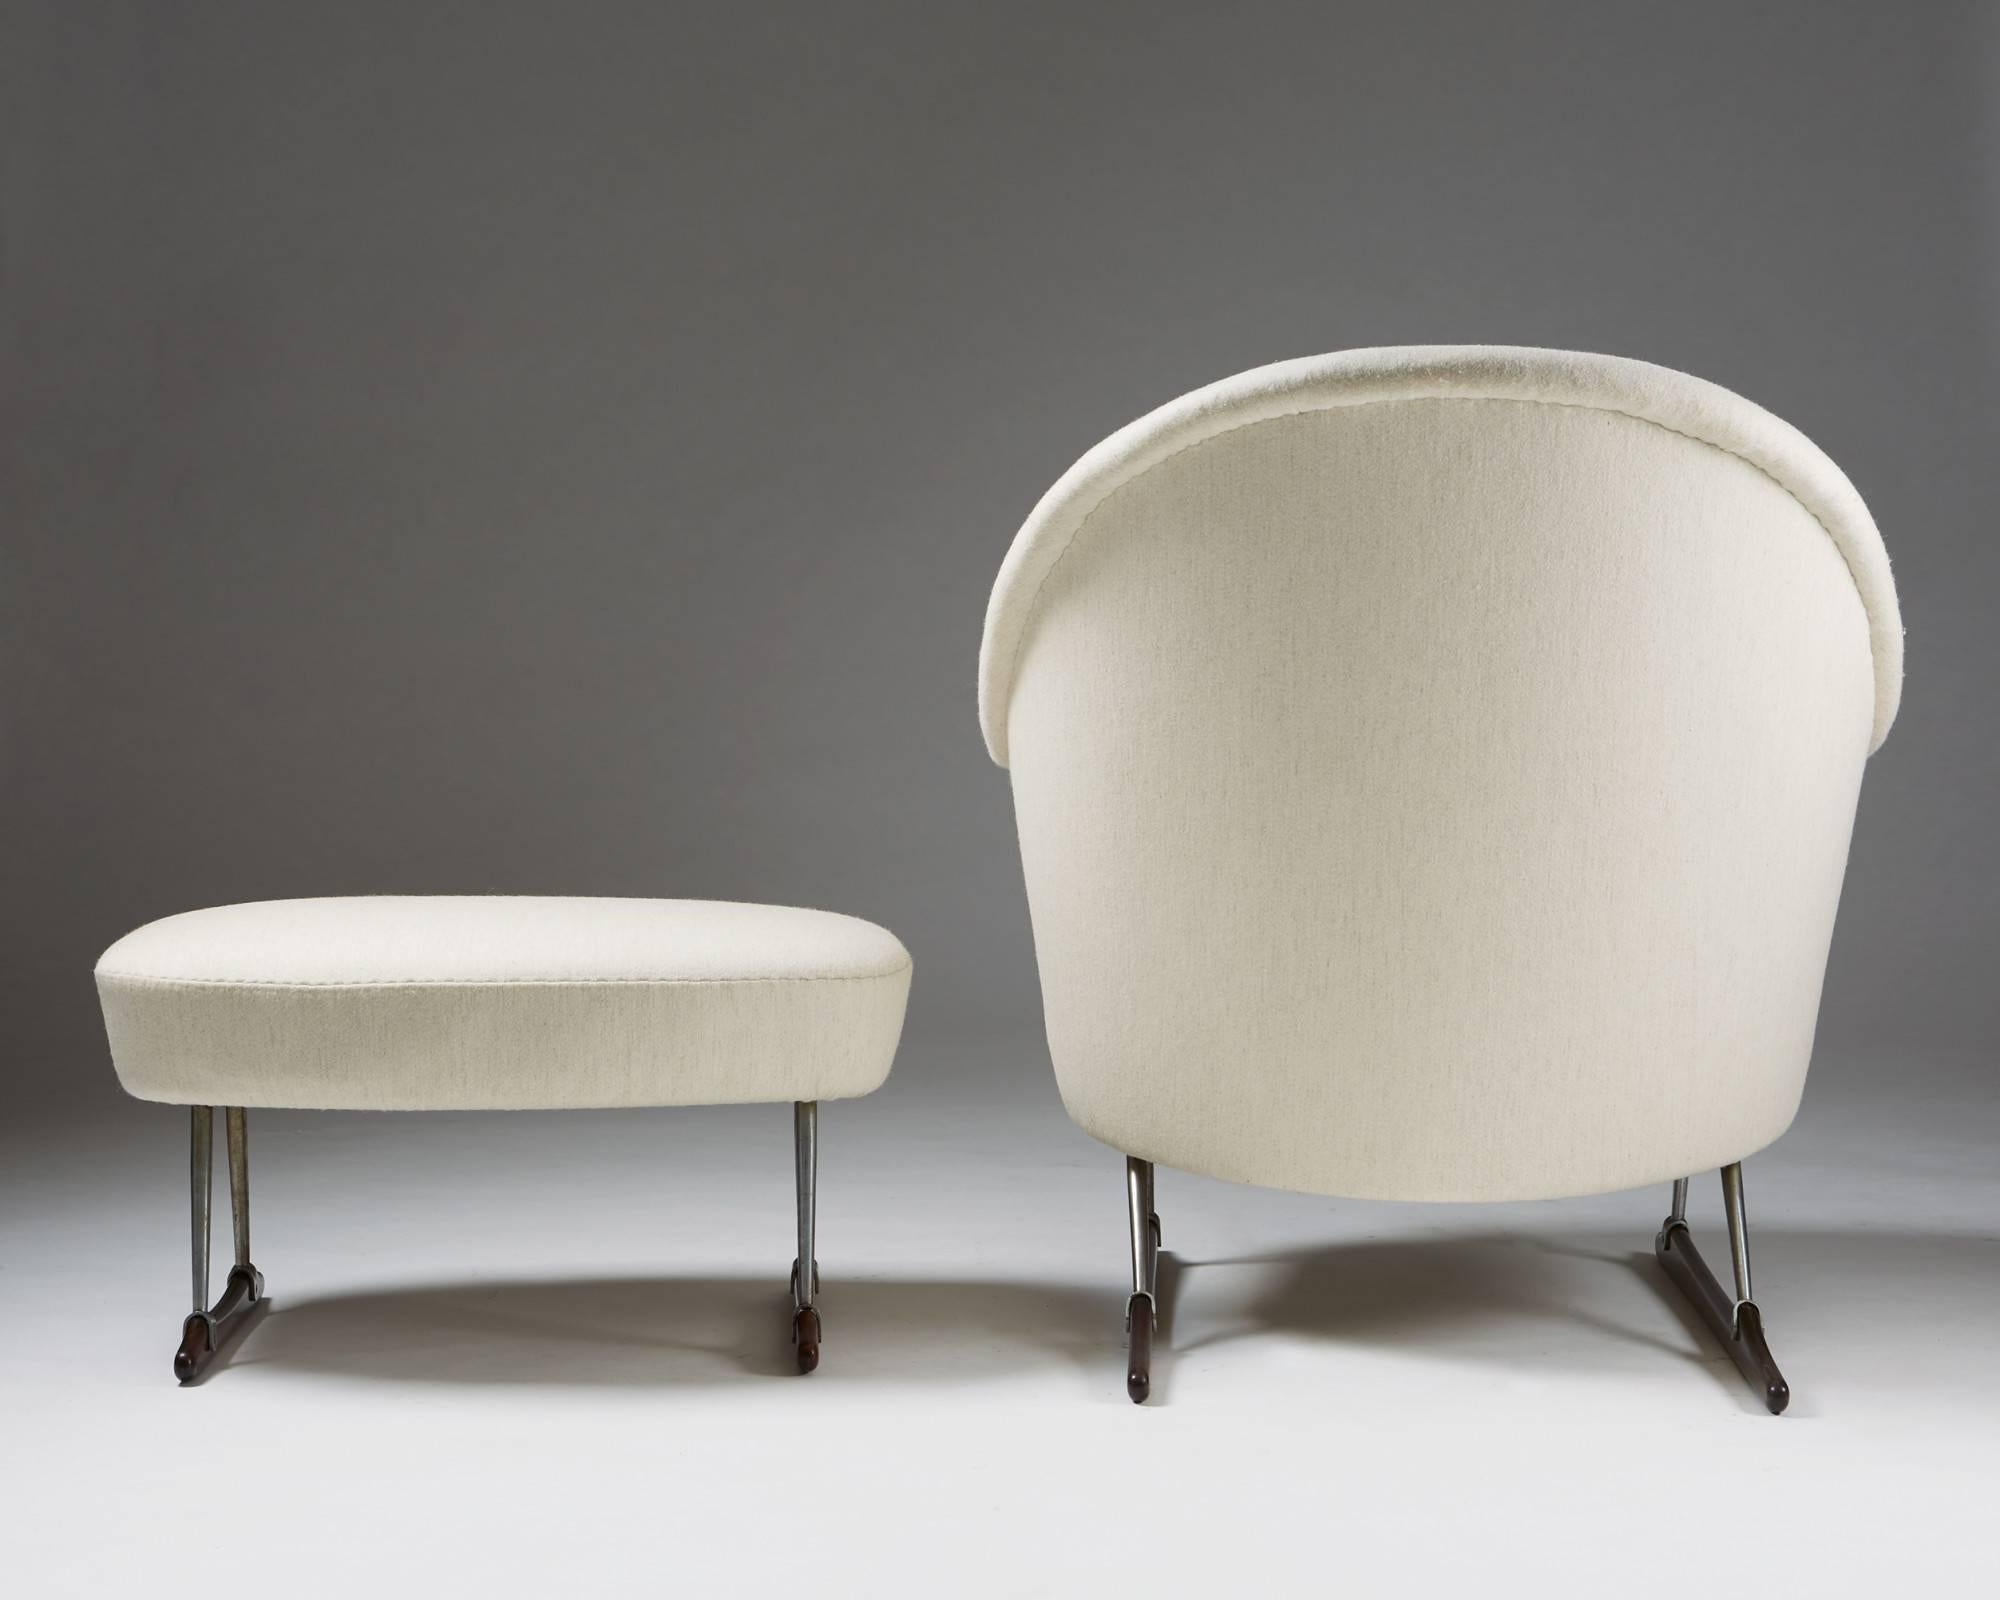 Danish Sleigh Chair and footstool by Børge Mogensen for Tage M Christensen & Co, 1953 For Sale